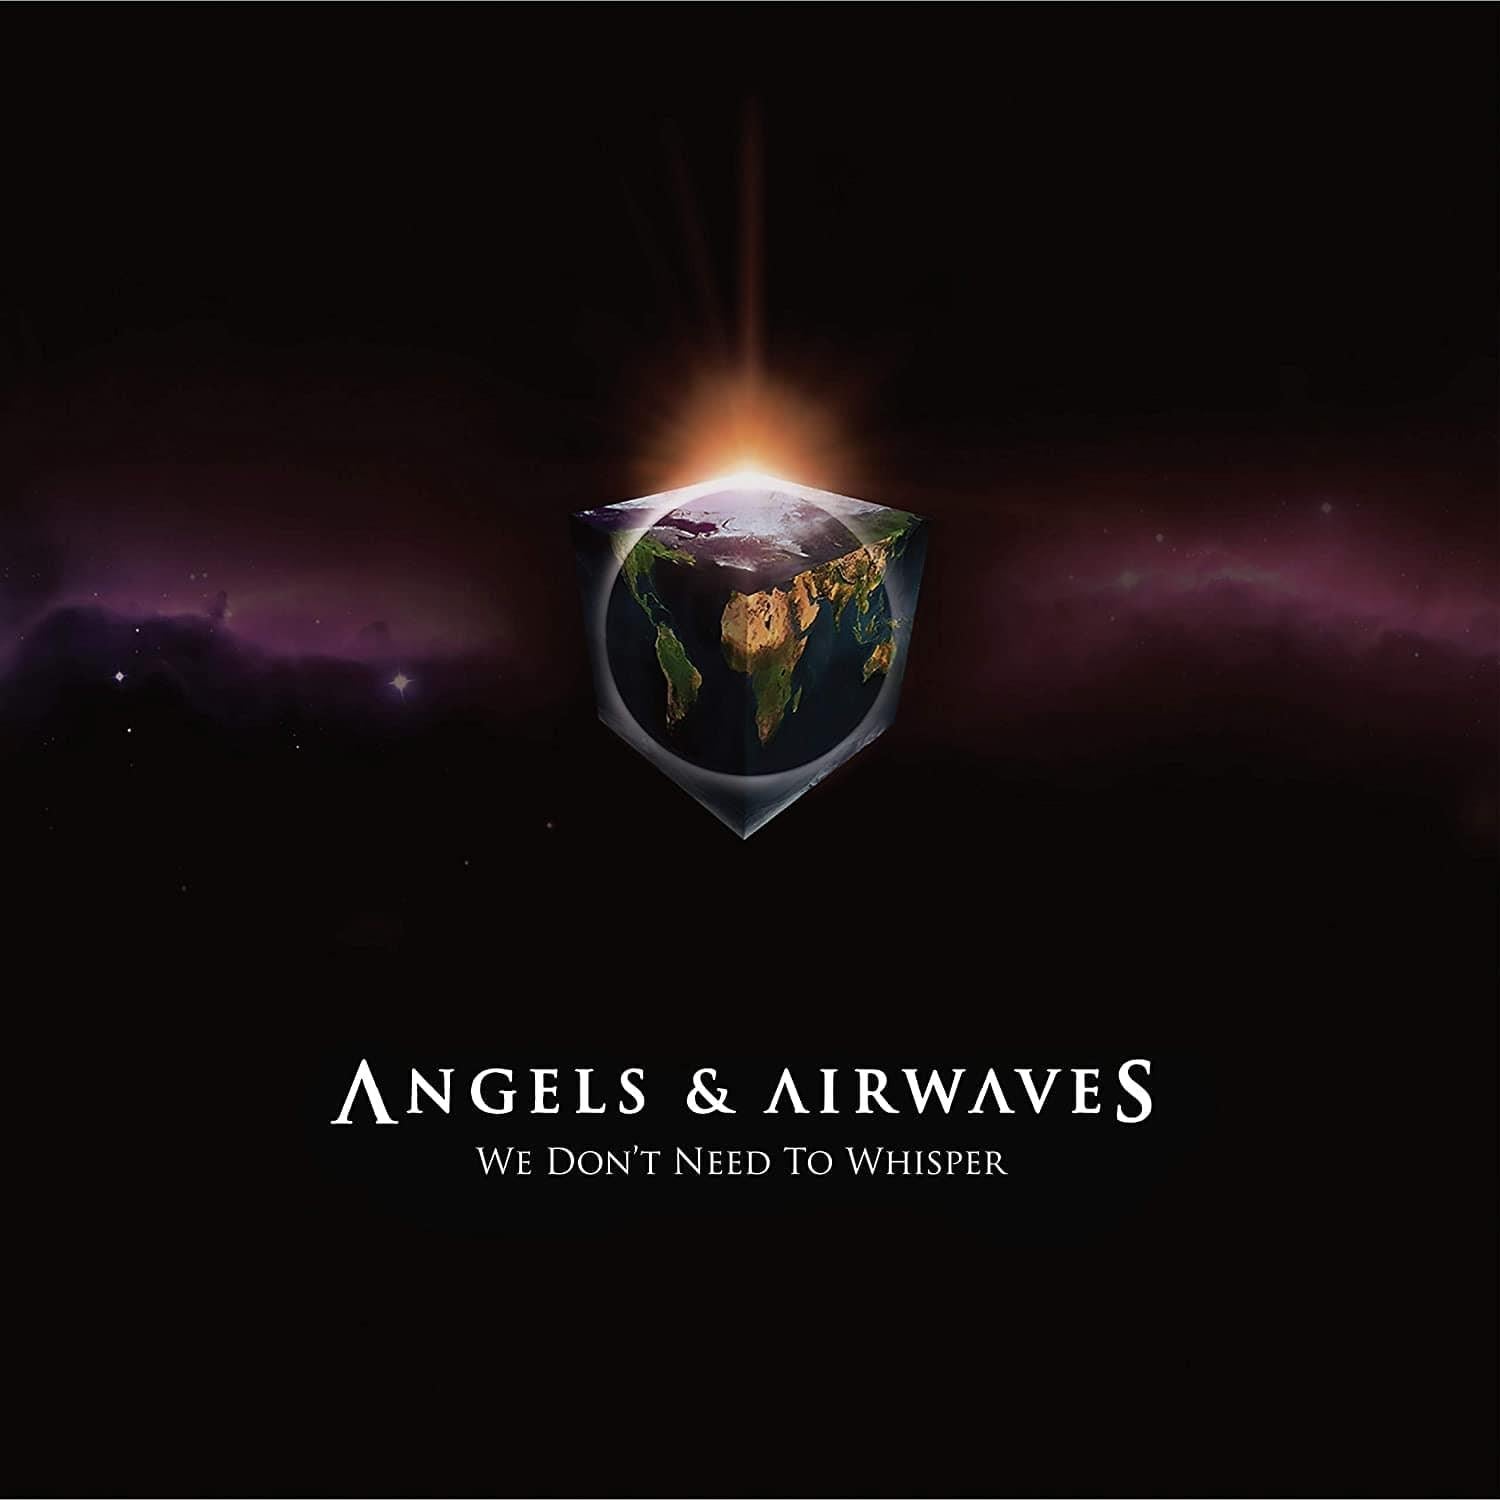 Angels & Airwaves - We Don't Need to Whisper (Limited Edition, Black & Pink Haze Color) (2 LP) - Joco Records